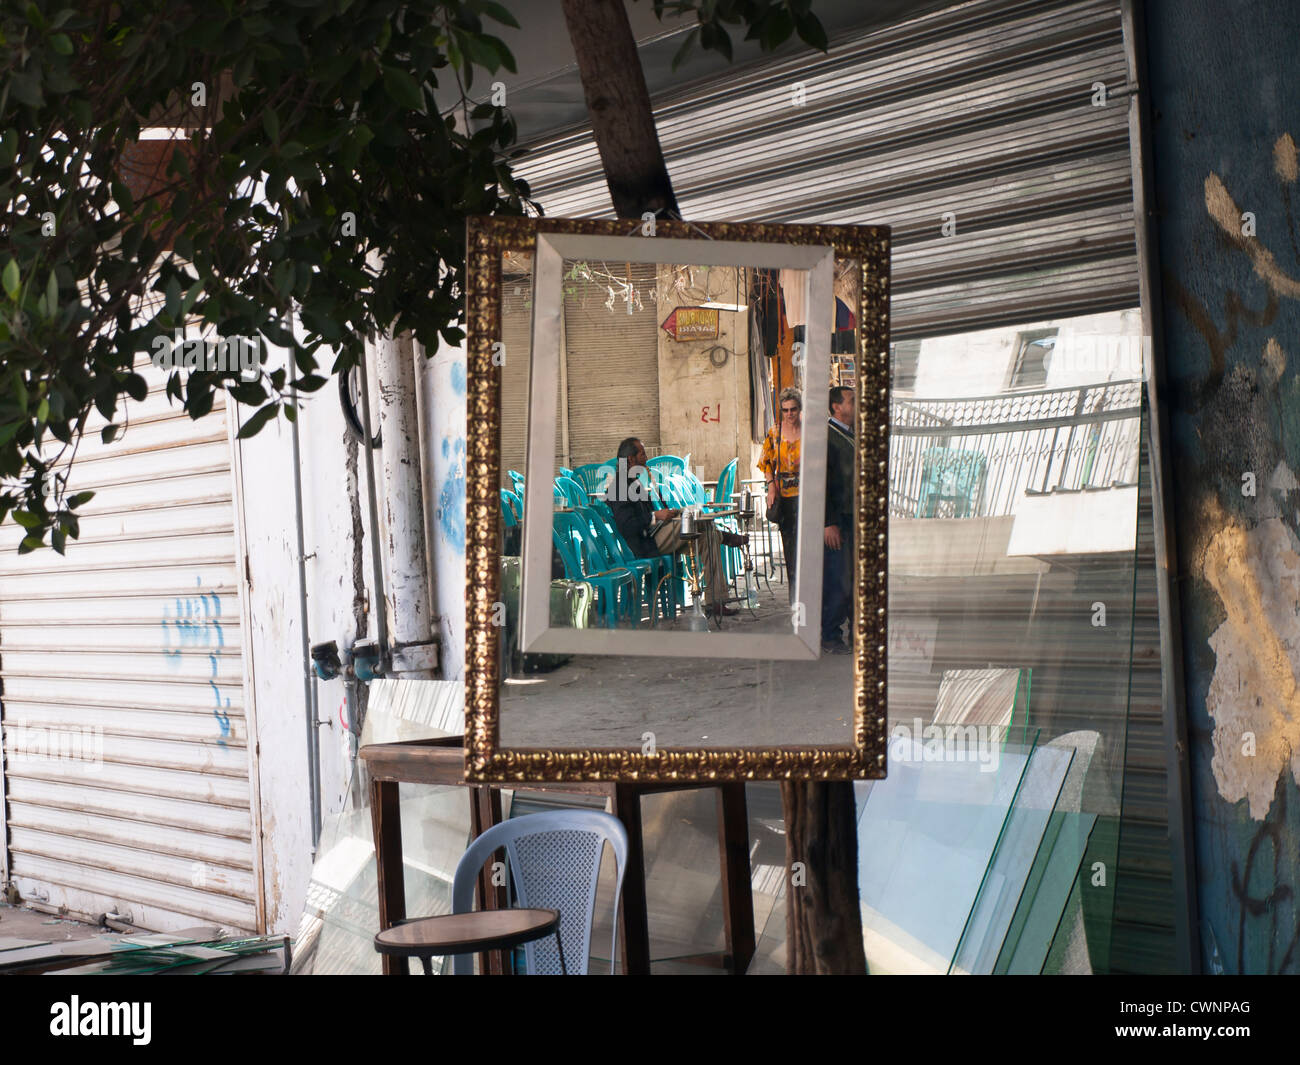 Mirror with extra frame hanging outside a shop in Aqaba Jordan, showing the image of a man enjoying his narghile waterpipe Stock Photo